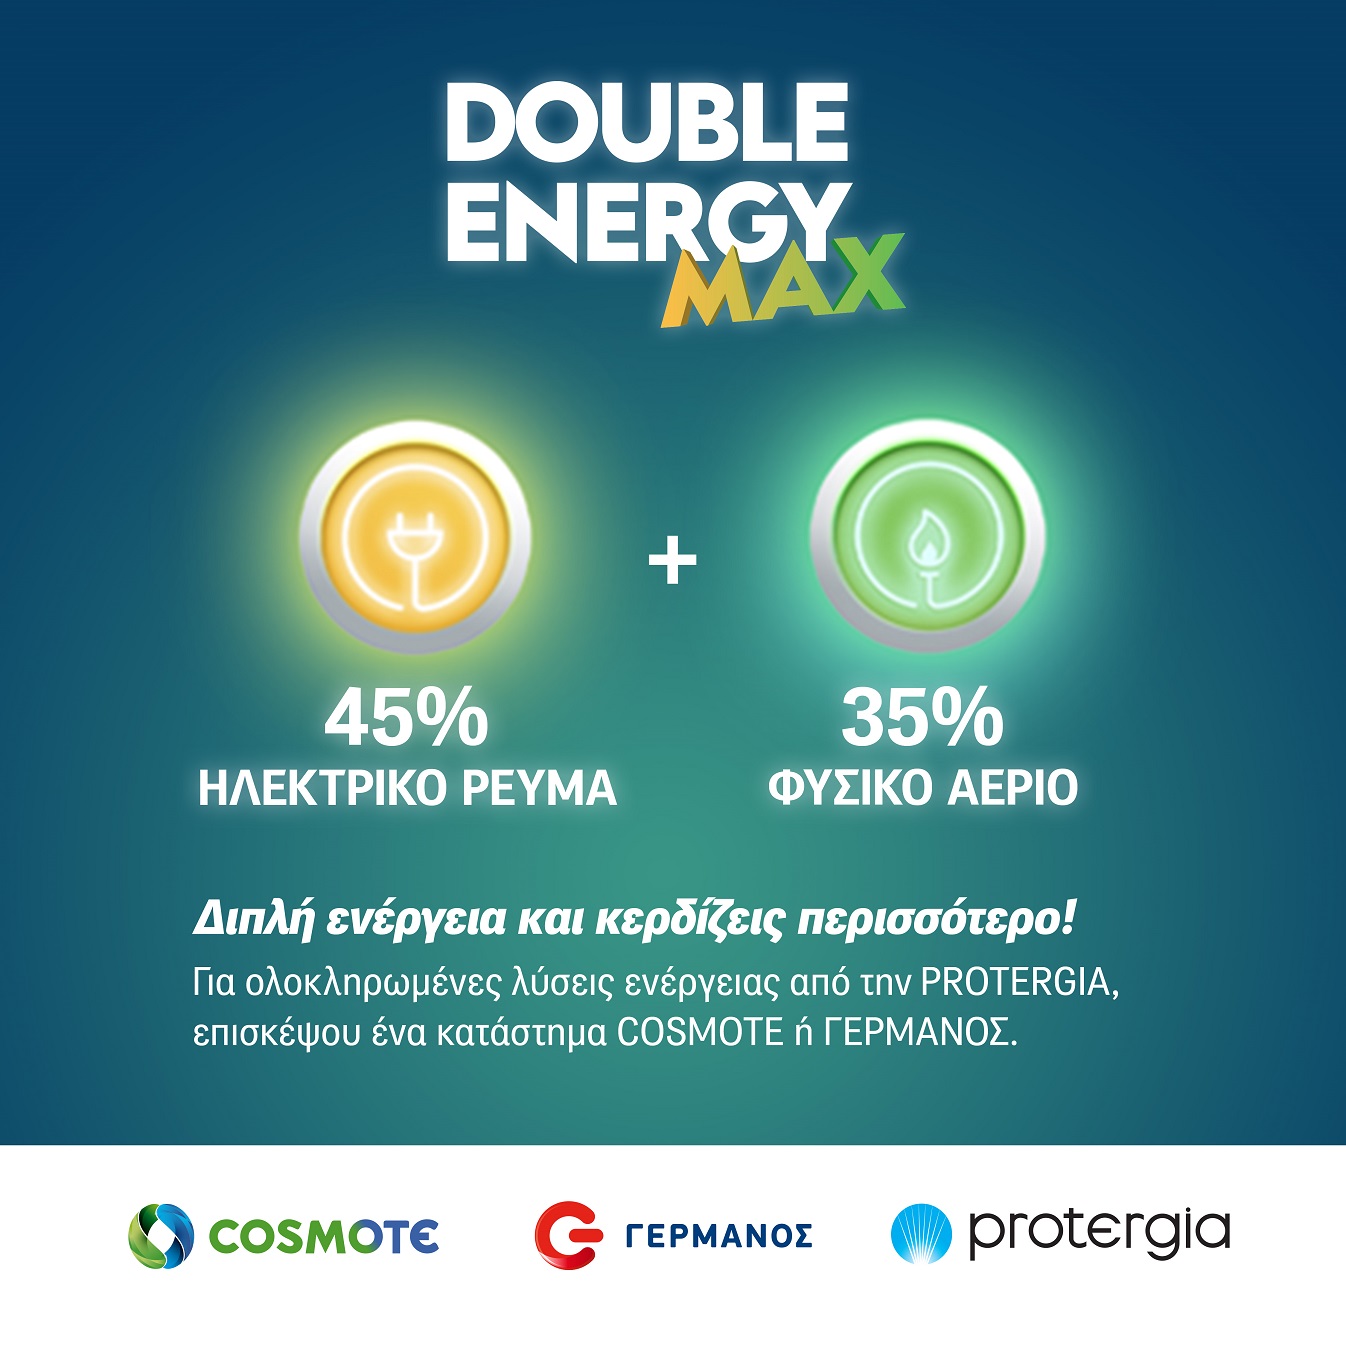 protergia_double_enery_max_.jpg